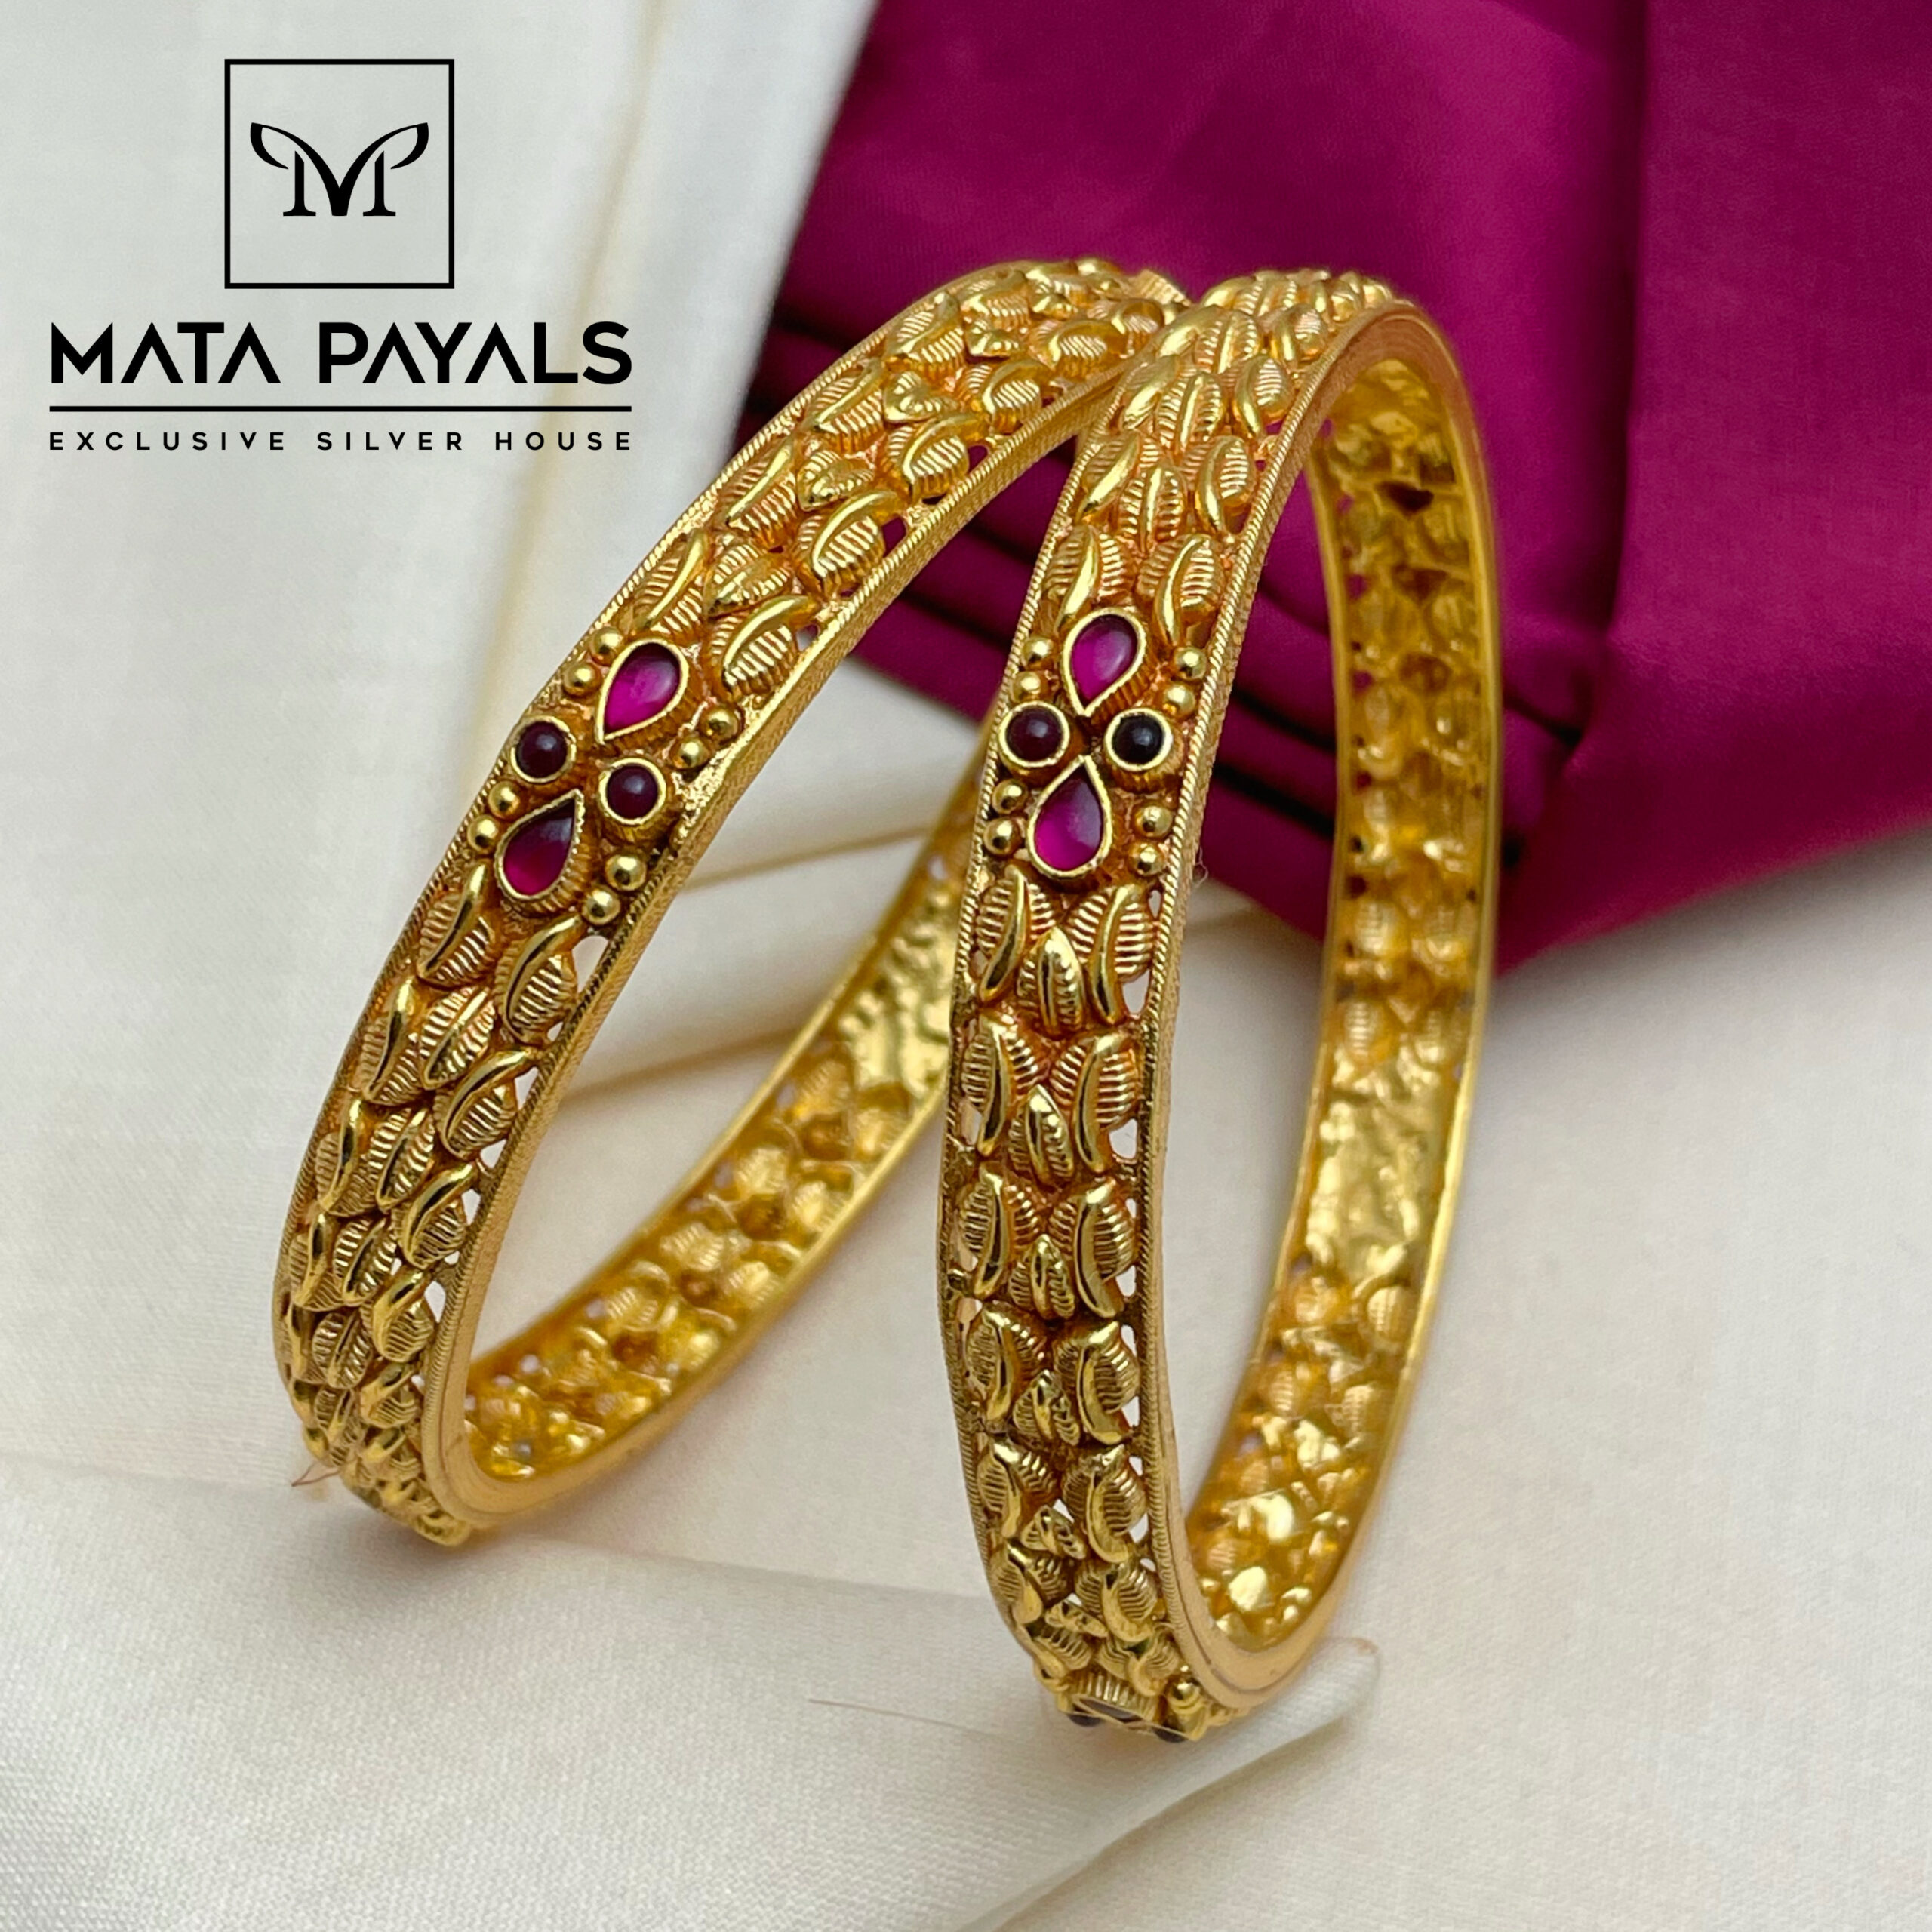 Silver Gold Plated Bangles - Mata Payals Exclusive Silver Jewellery